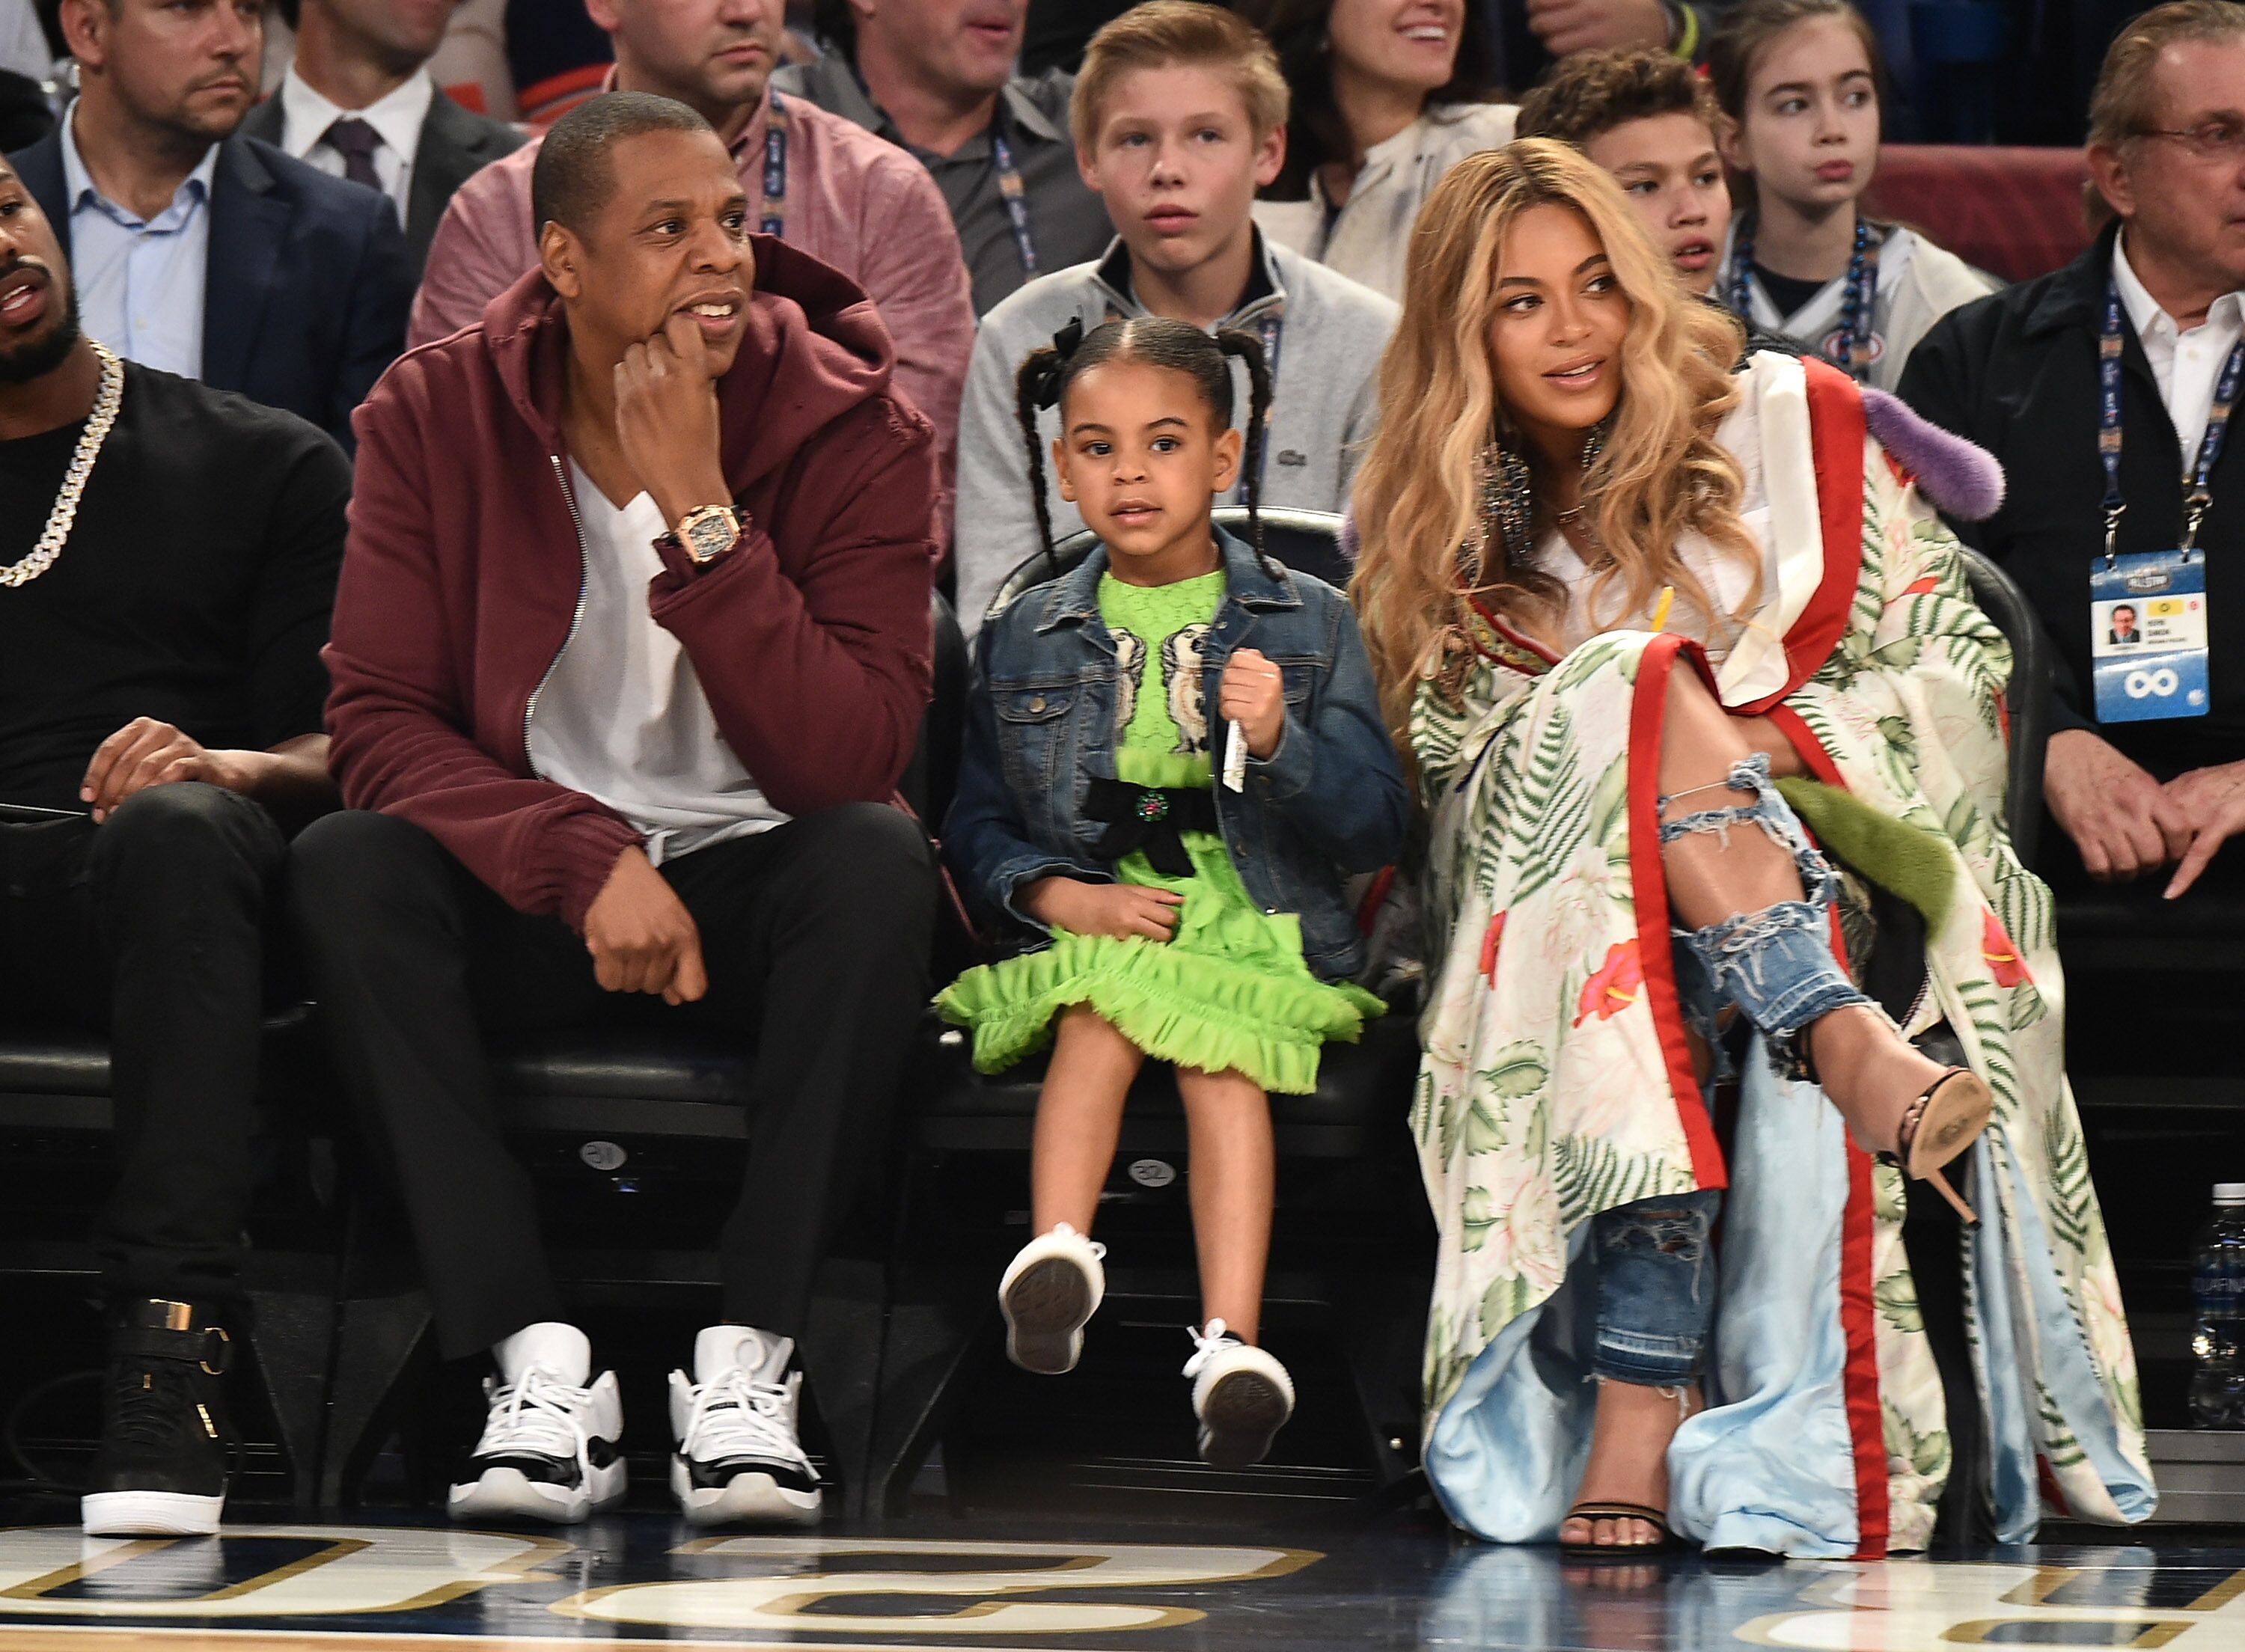 Beyoncé Attended The 2020 Super Bowl With Husband Jay Z And Their Daughter Blue Ivy